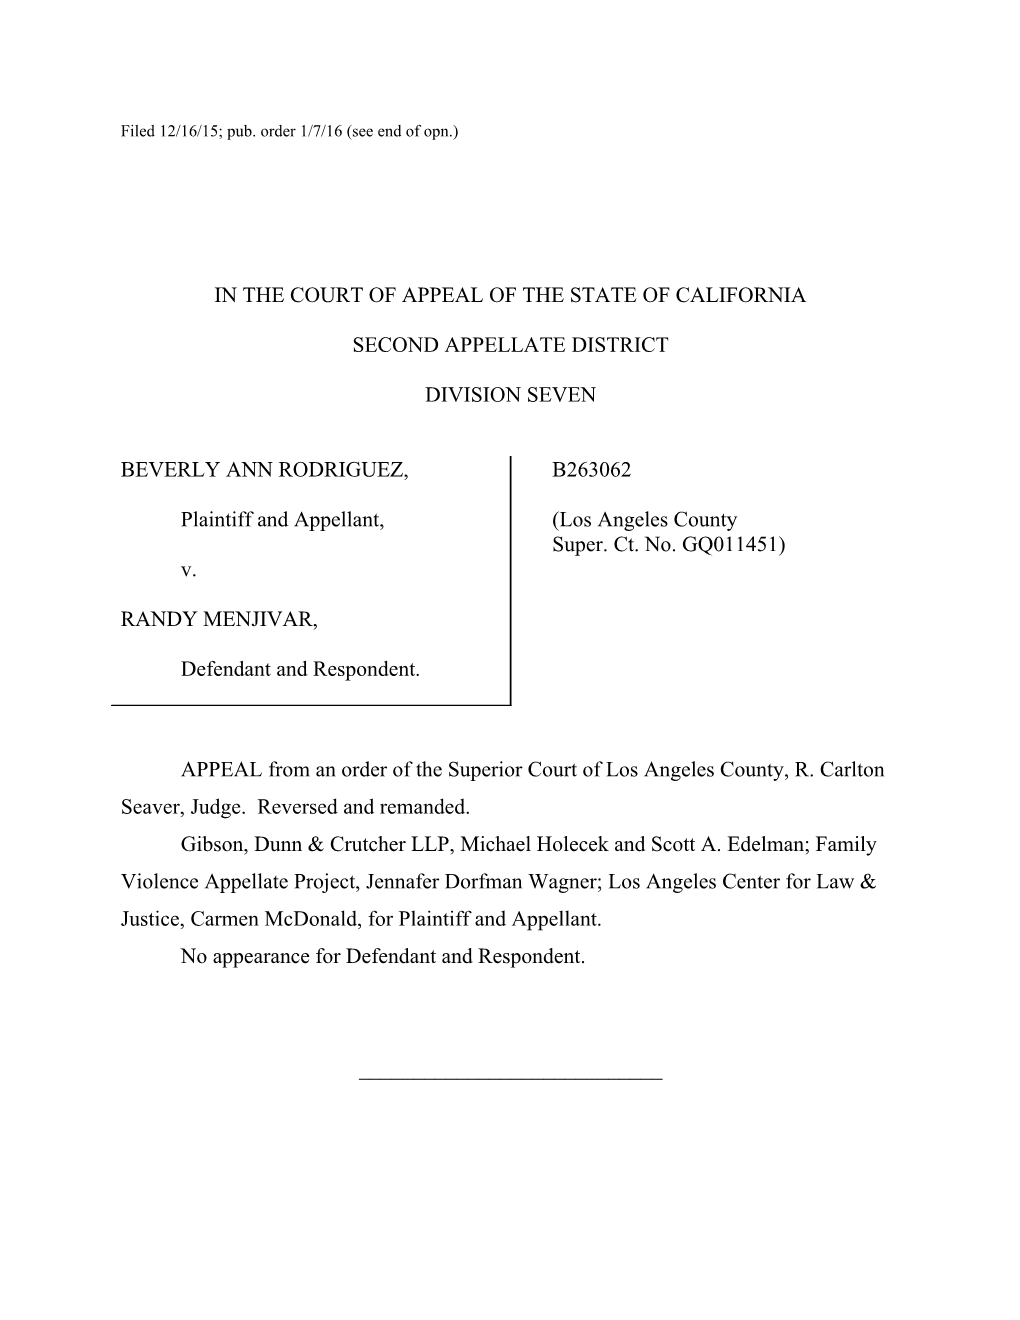 Filed 12/16/15; Pub. Order 1/7/16 (See End of Opn.)